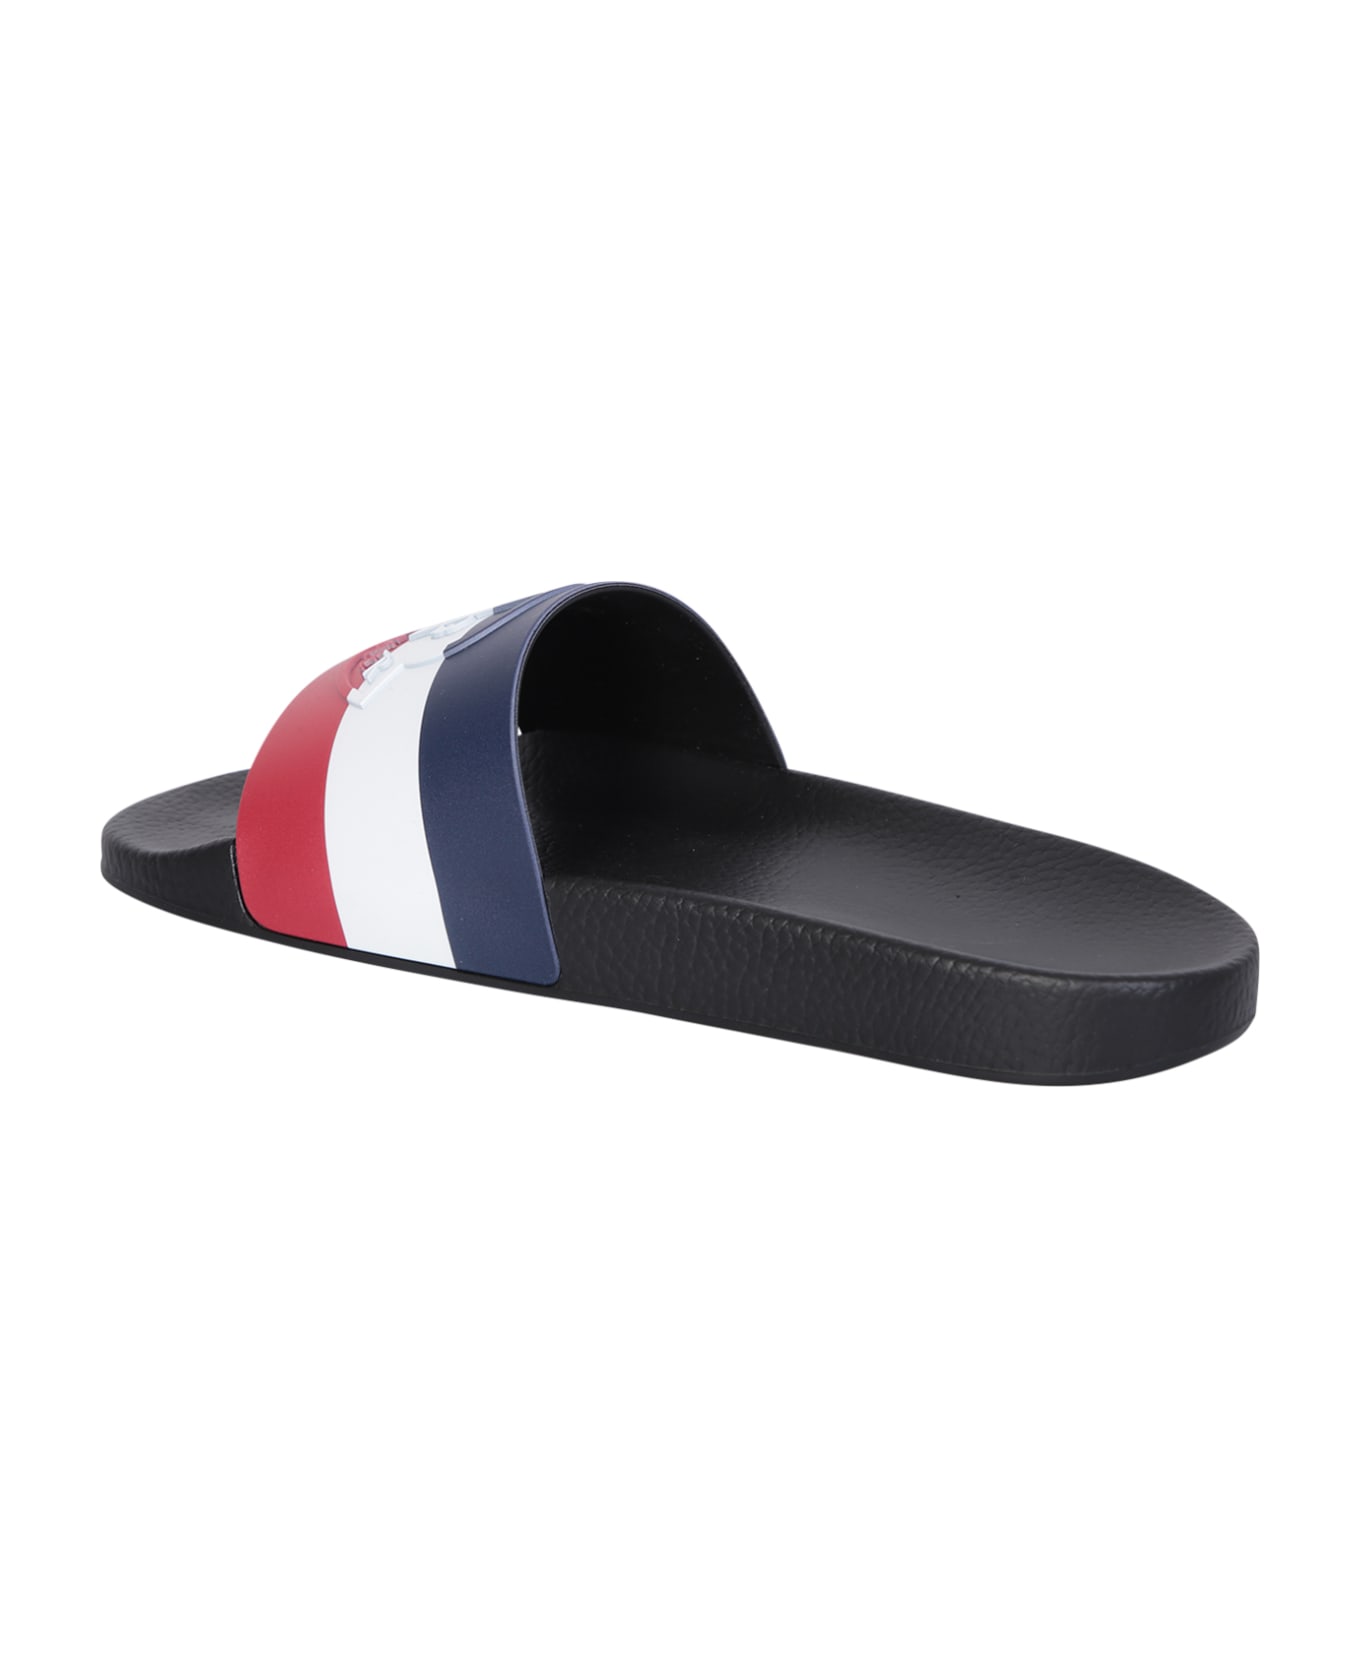 Moncler Shoes - Nero その他各種シューズ